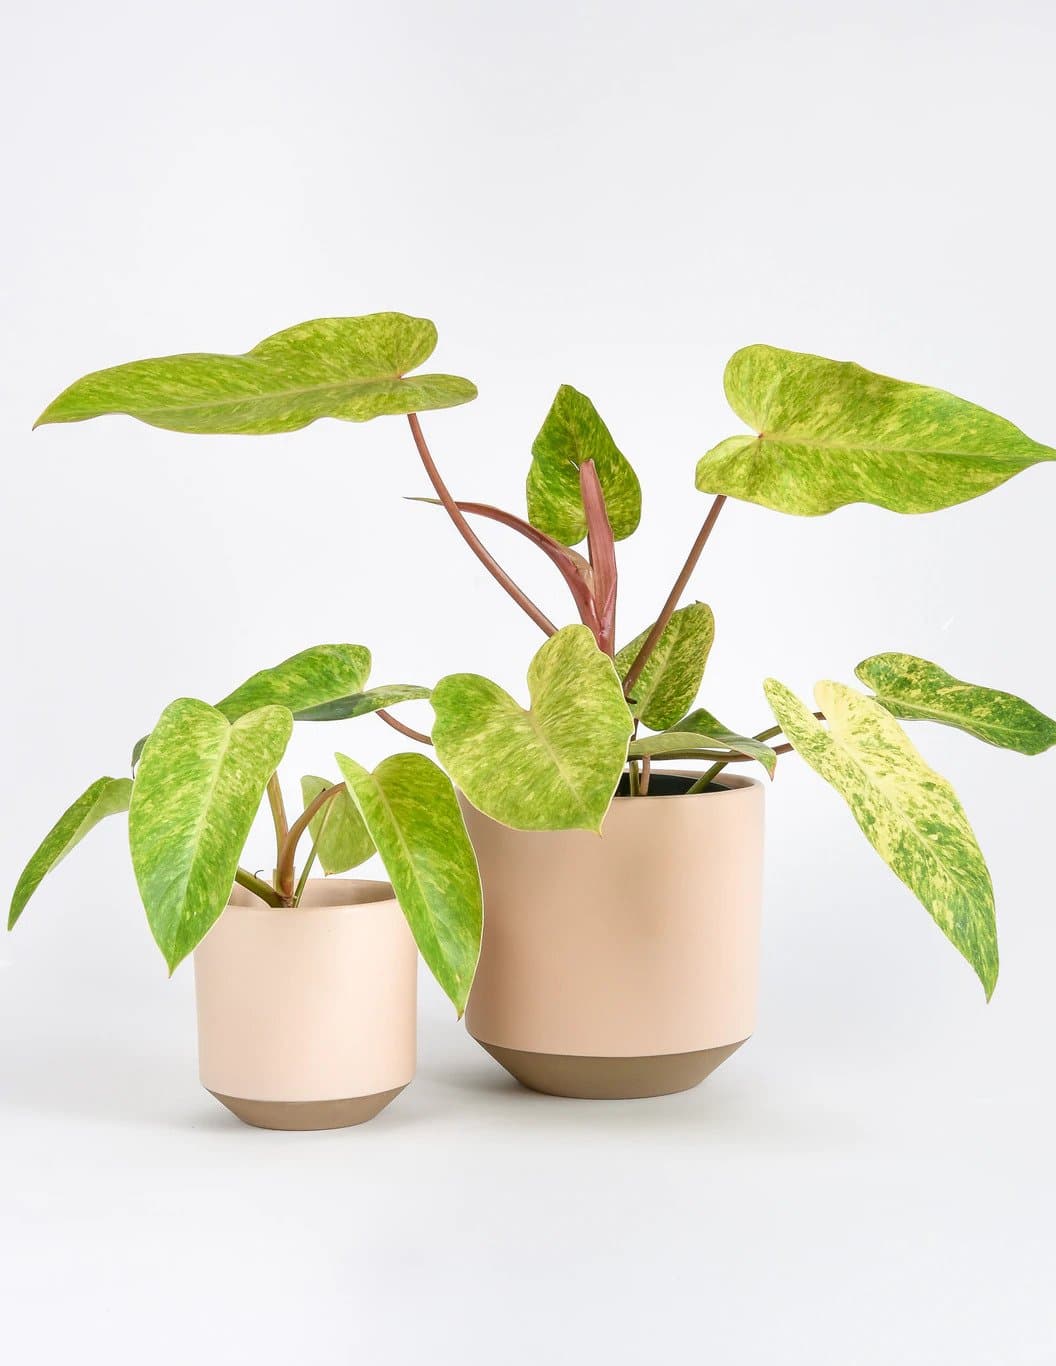 6 Mistakes to Avoid with Your Philodendron Painted Lady